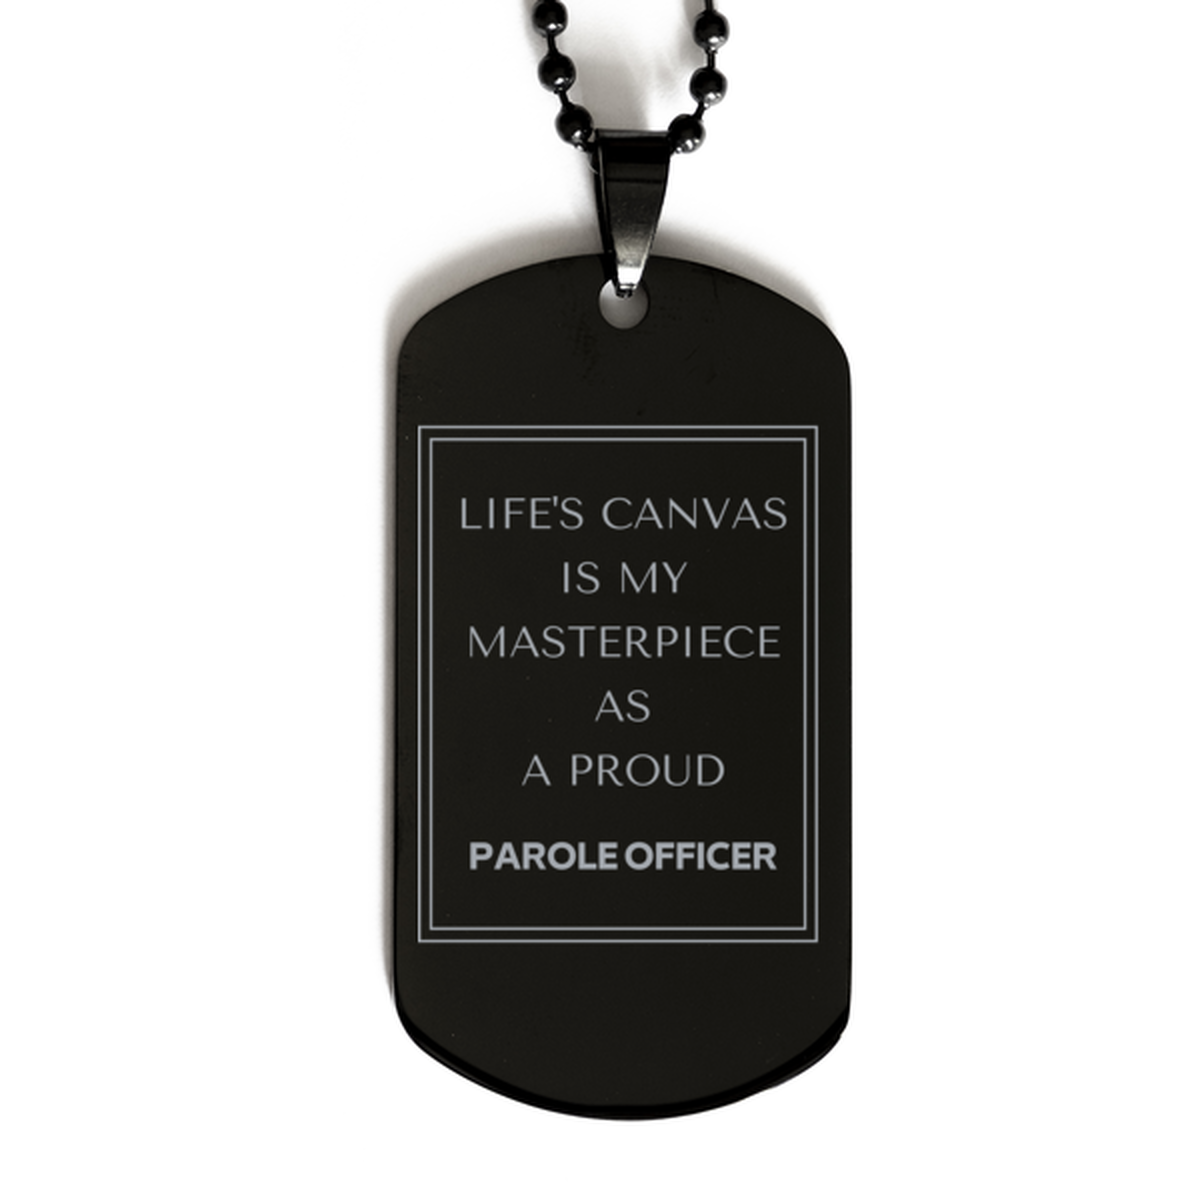 Proud Parole Officer Gifts, Life's canvas is my masterpiece, Epic Birthday Christmas Unique Black Dog Tag For Parole Officer, Coworkers, Men, Women, Friends